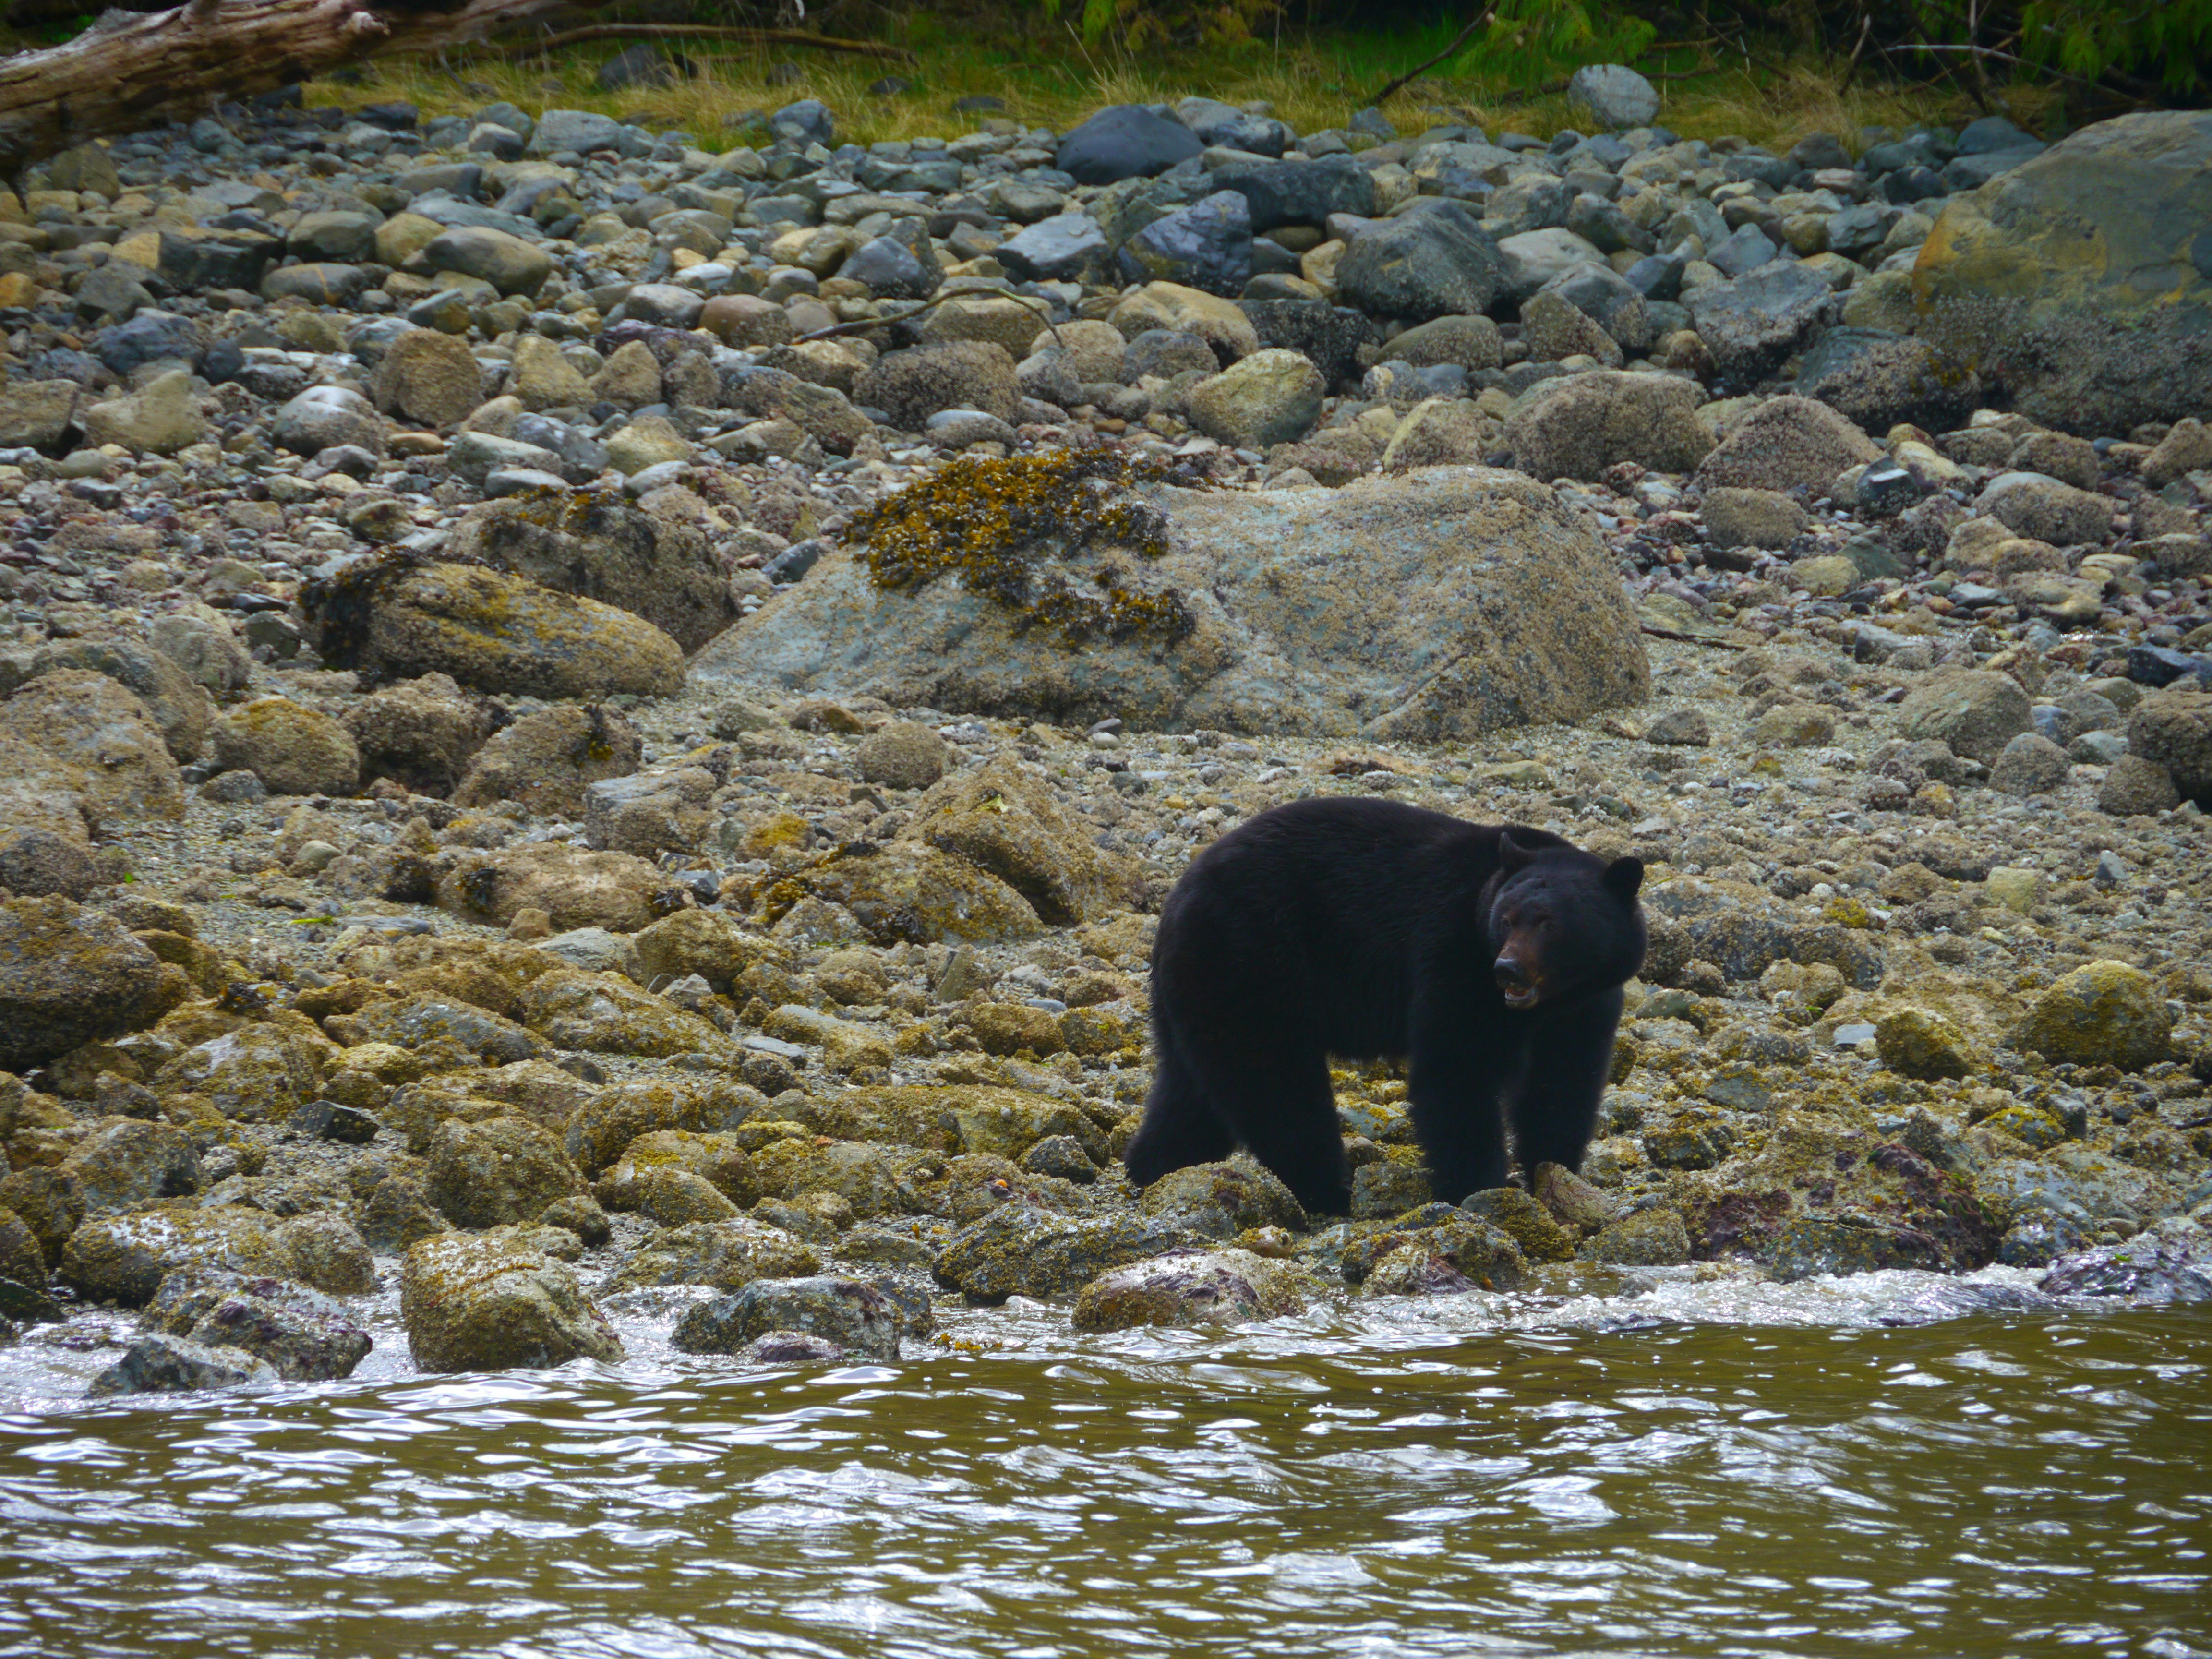 A black bear stands on the rocky shores of Tofino, its head turned over its right shoulder to look at something out of the frame. The rocks are covered in lichen and seaweed, while in the background they take on more of a grey color. Beyond the shore is a thin strip of bright green grass.